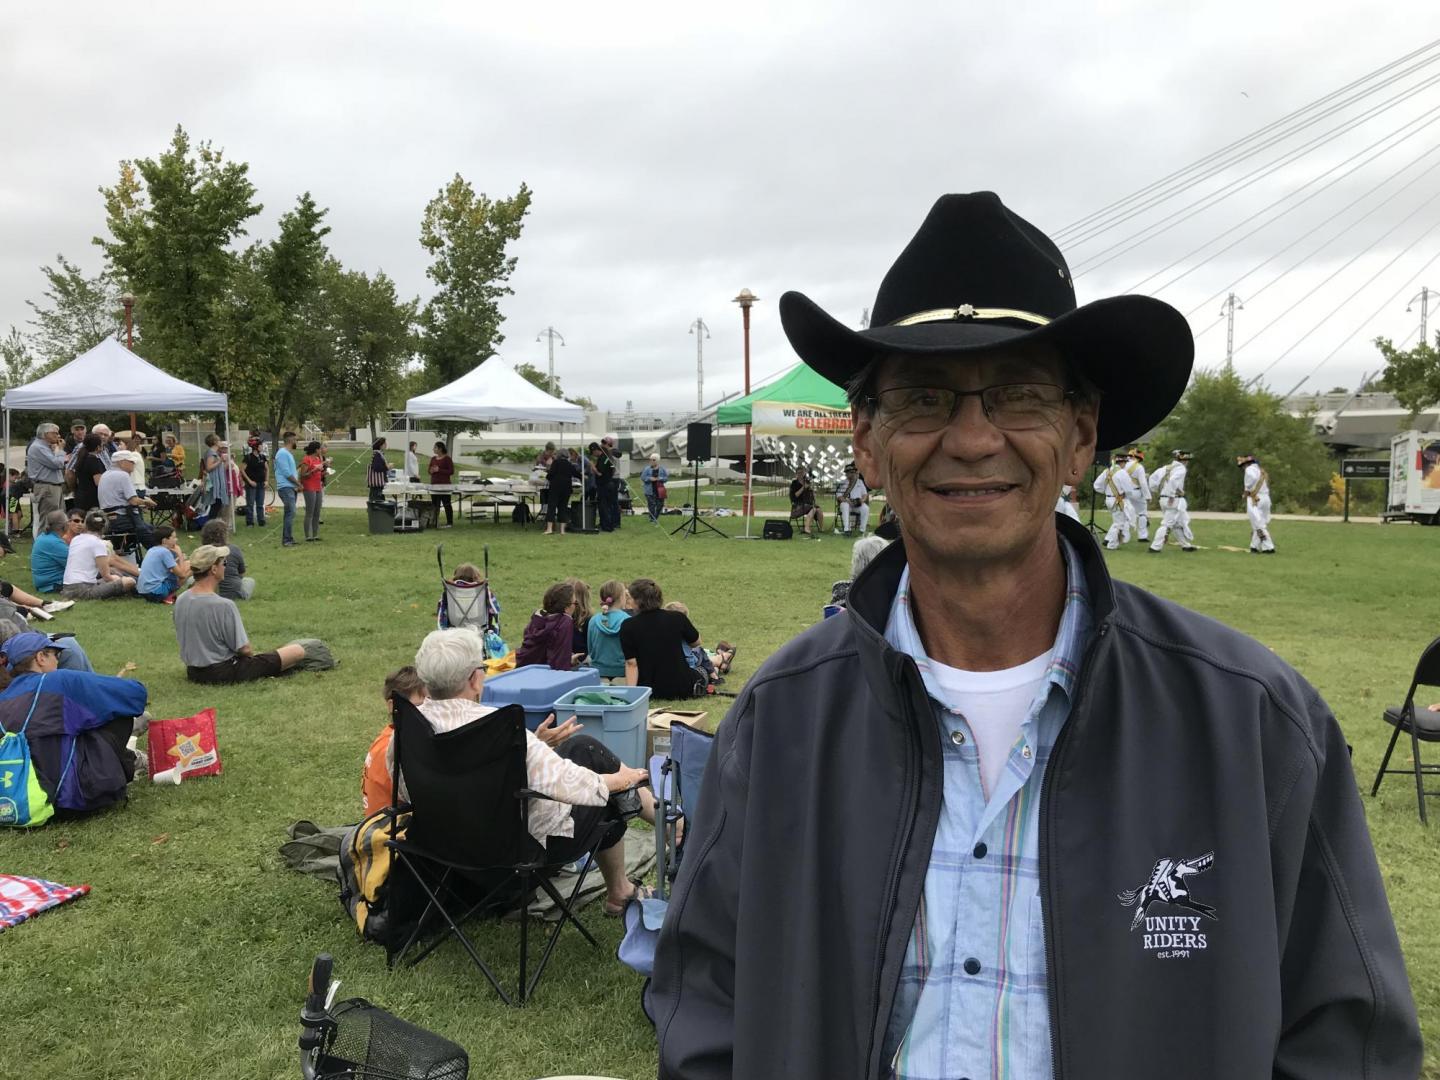 An Indigenous man in a cowboy hat at an outdoor event